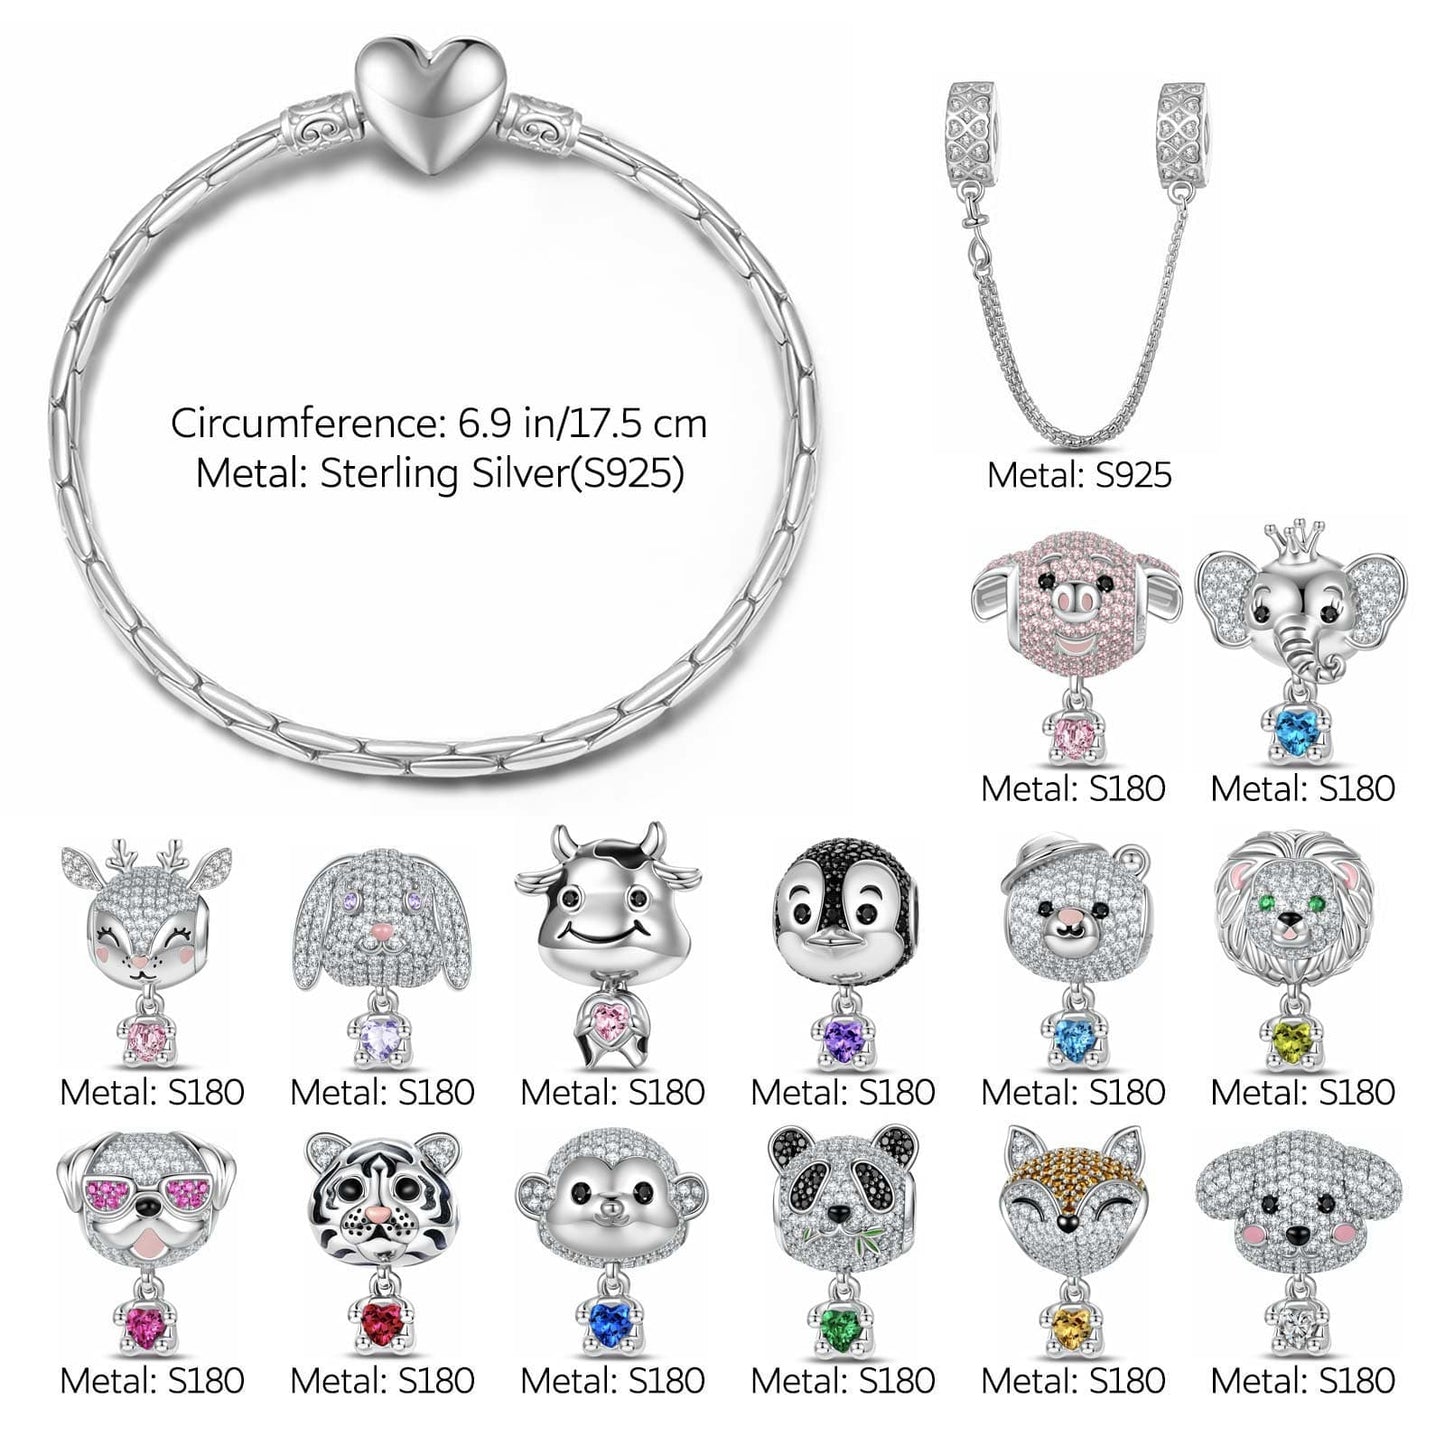 Sterling Silver Love You Baby Animals Charms Bracelet Set With Enamel In White Gold Plated - Heartful Hugs Collection